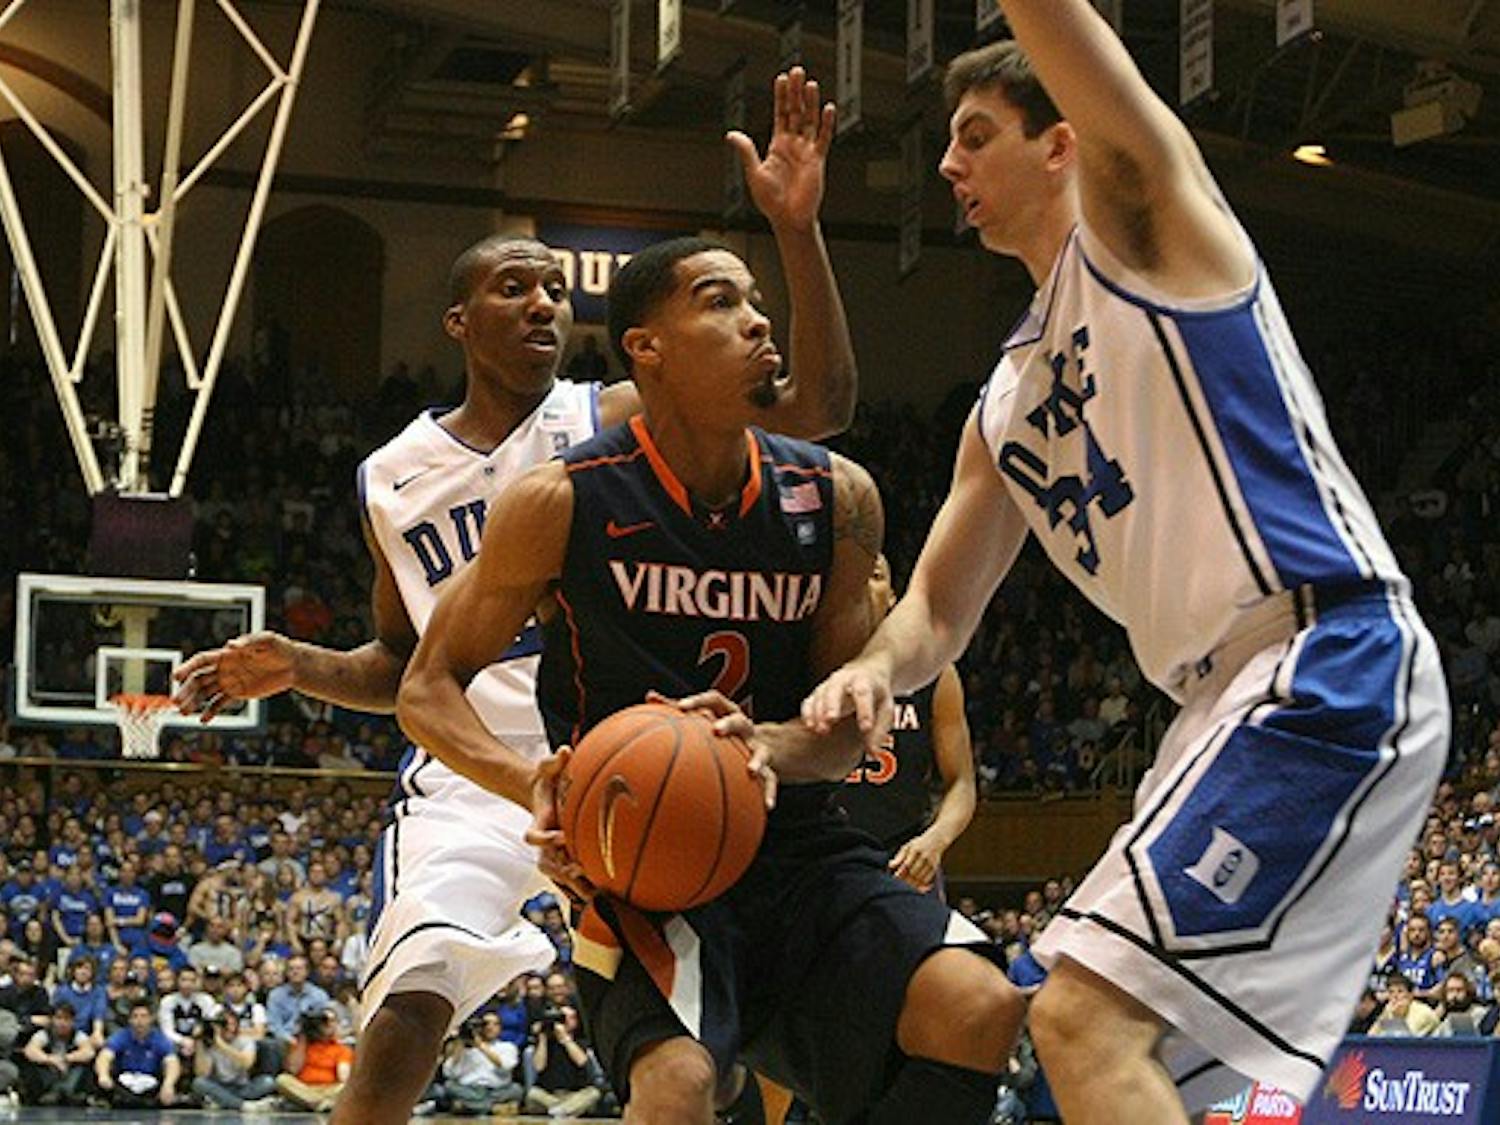 Virginia’s Mustapha Farrakhan scored 15 points in the Cavaliers’ 76-60 loss to Duke in Cameron a month ago.